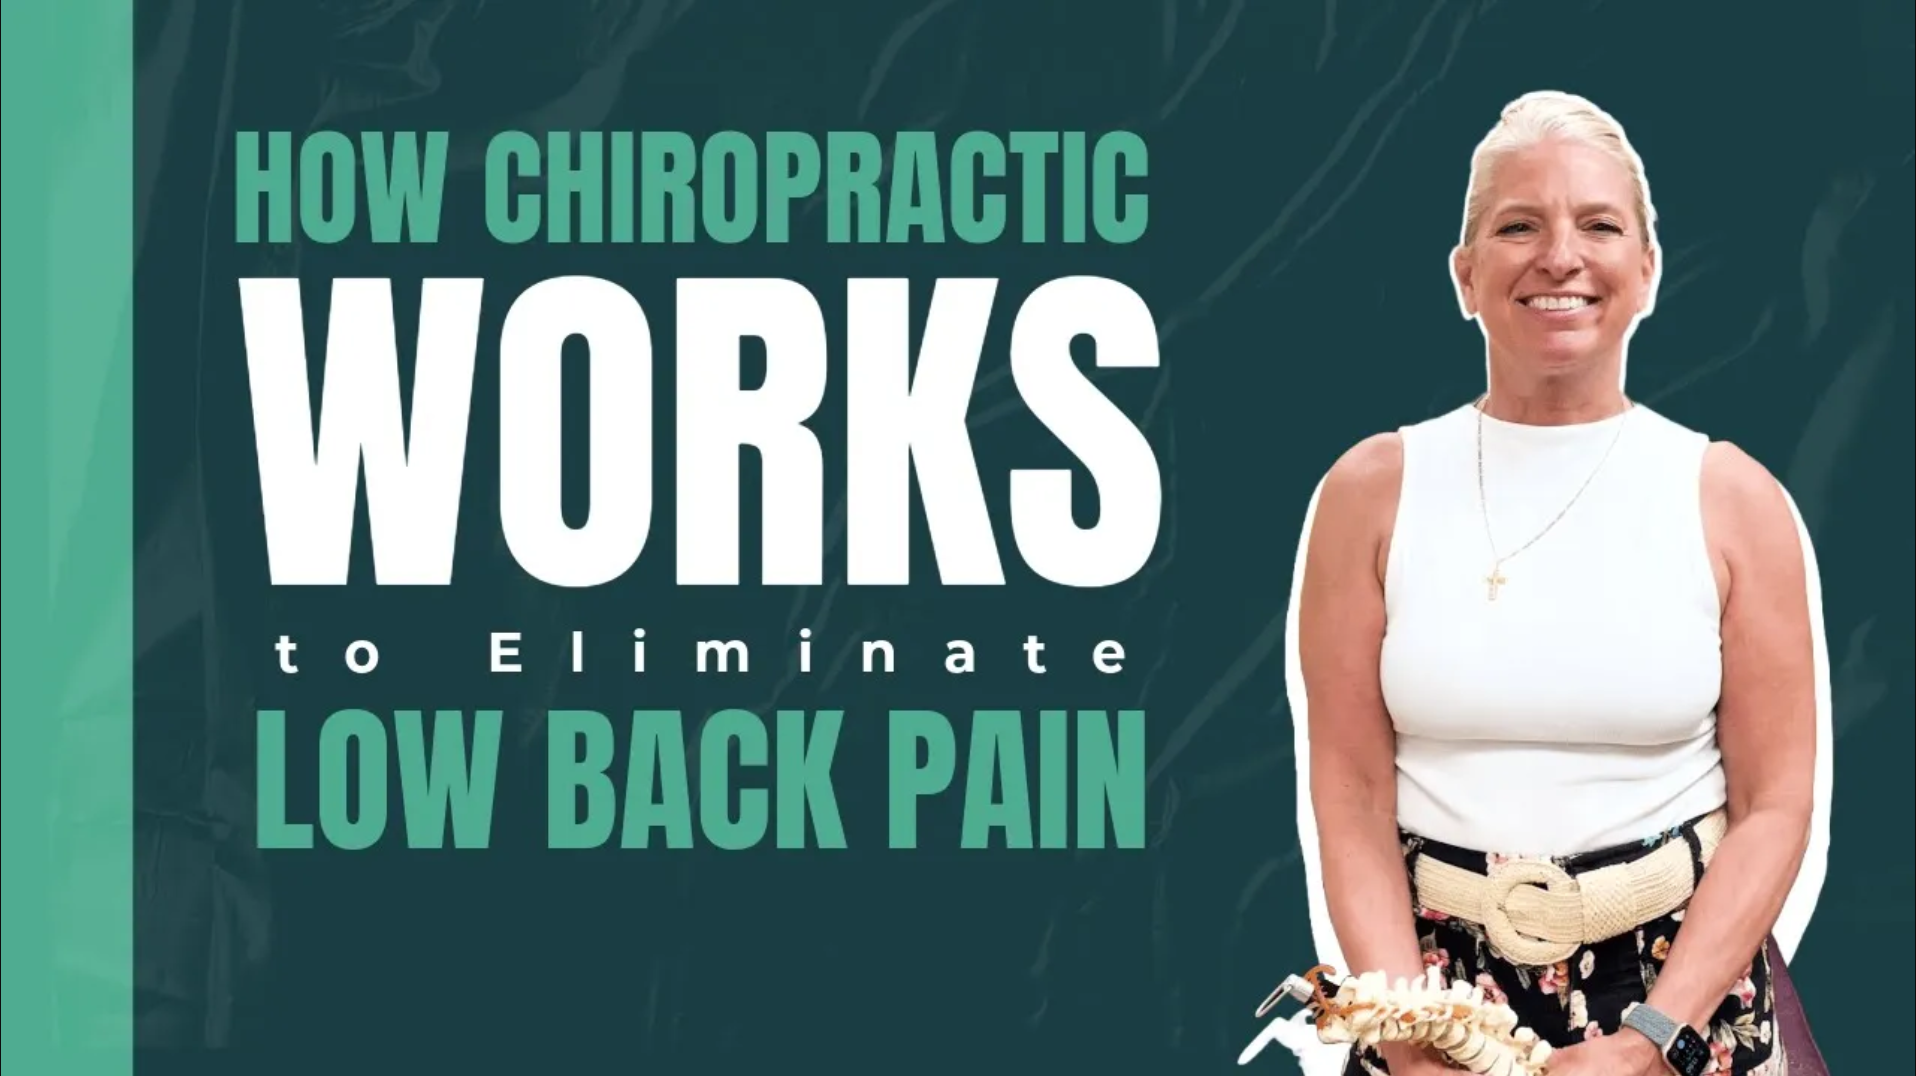 How Chiropractic Works to Eliminate Low Back Pain | Chiropractor for Low Back Pain in Belmar, NJ